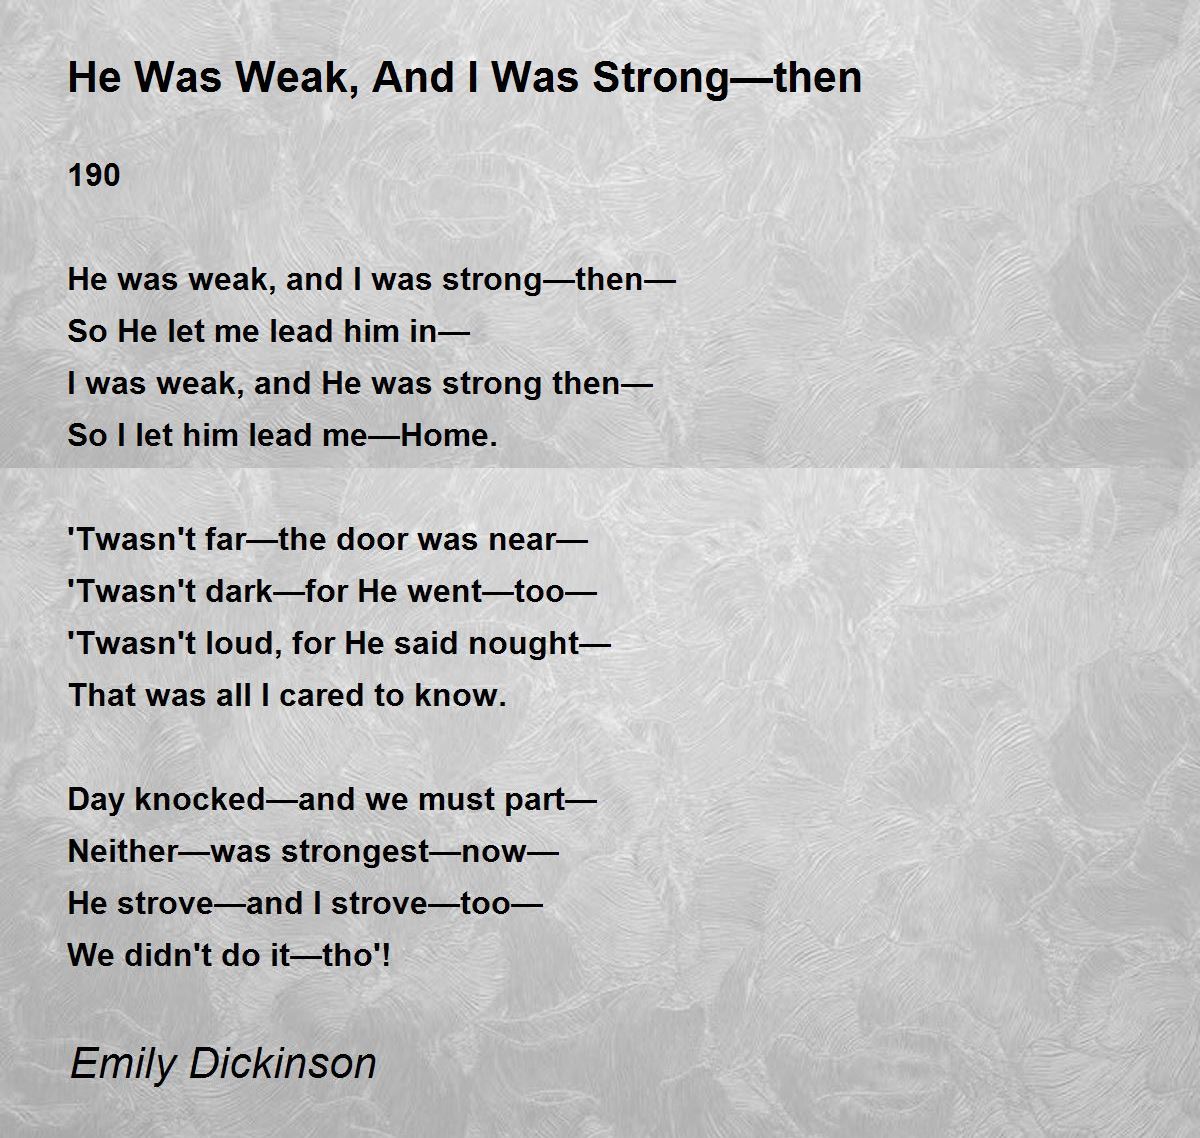 an epic poem features a weak character